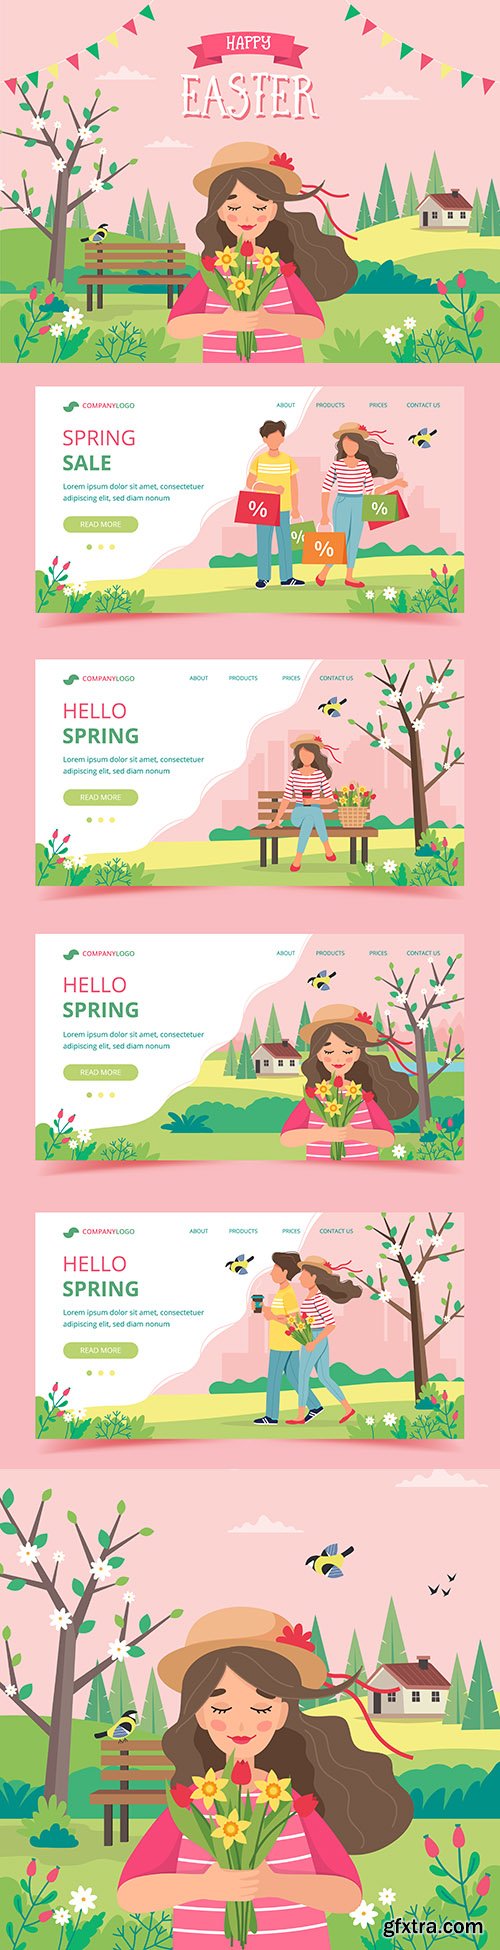 Girl in hat with flowers spring and Easter illustrations